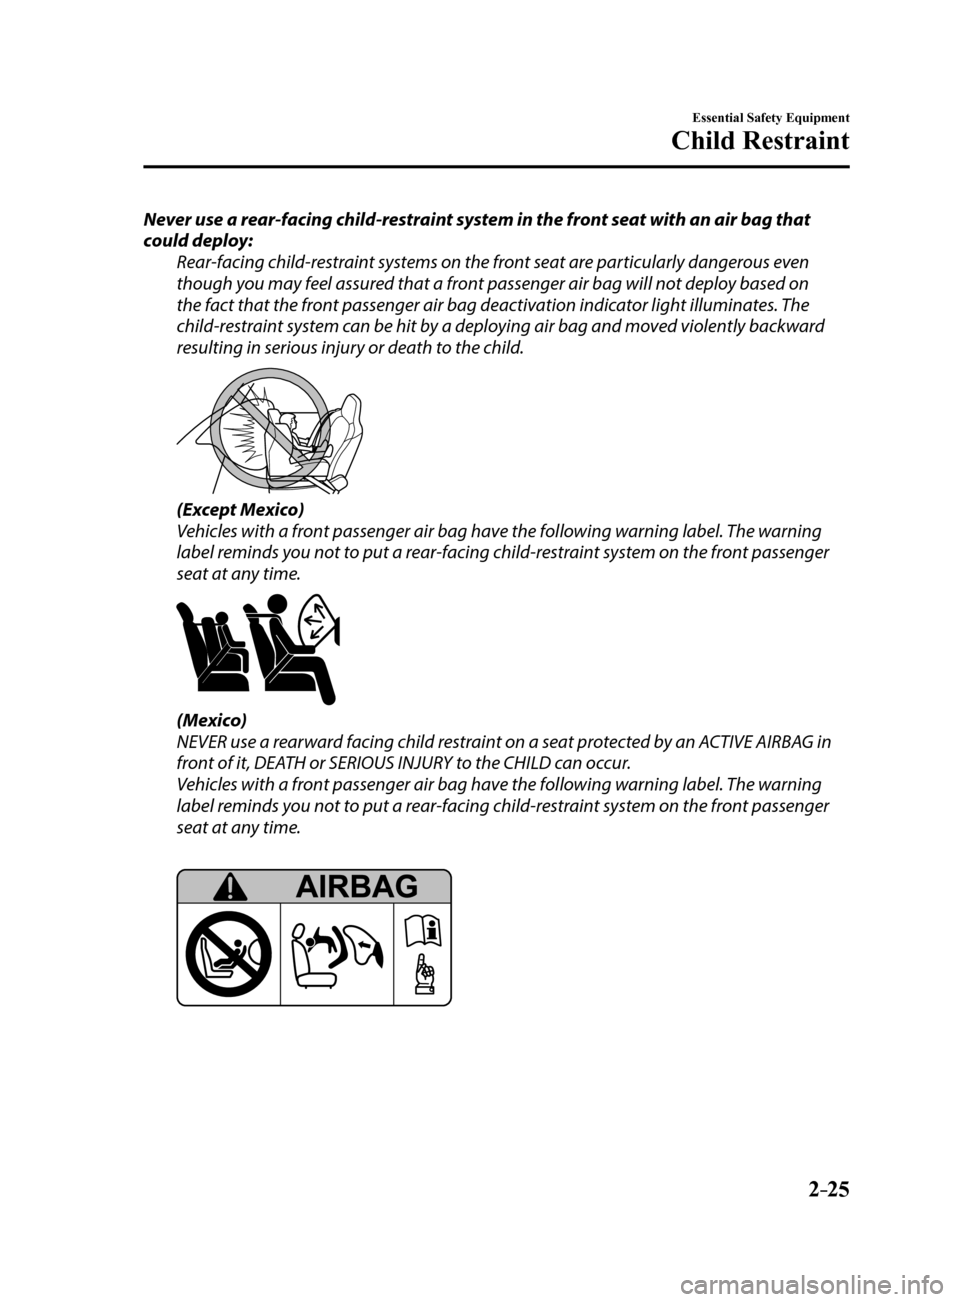 MAZDA MODEL 6 2017  Owners Manual (in English) 2–25
Essential Safety Equipment
Child Restraint
Never use a rear-facing child-restraint system in the front seat with an air bag that 
could deploy:Rear-facing child-restraint systems on the front s